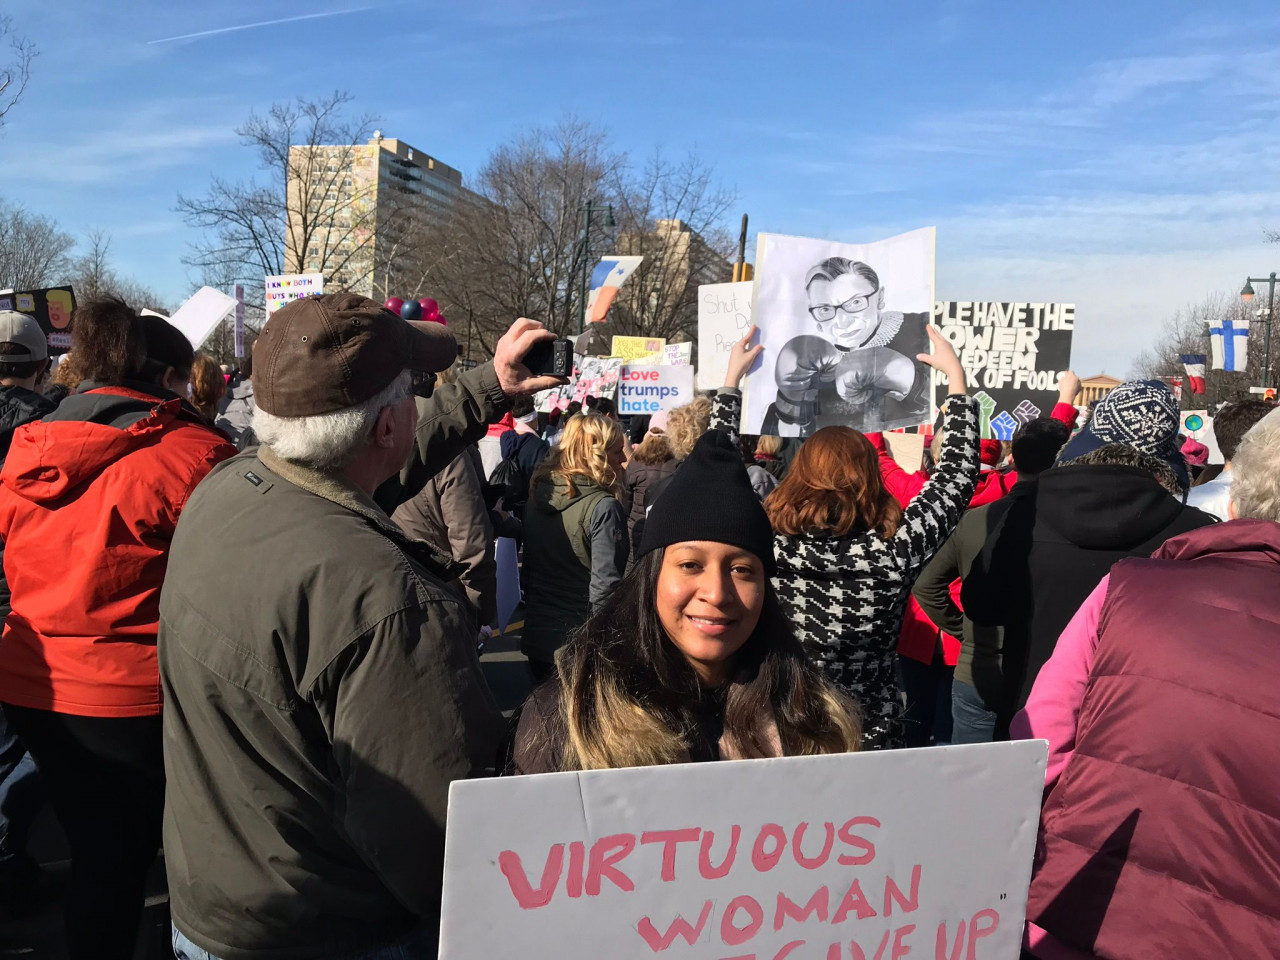 Philly Women's March 2018 - <a class="bx-tag" rel="tag" href="https://wethepeople.care/searchKeyword.php?type=keyword&keyword=RBG"><s>#</s><b>RBG</b></a>